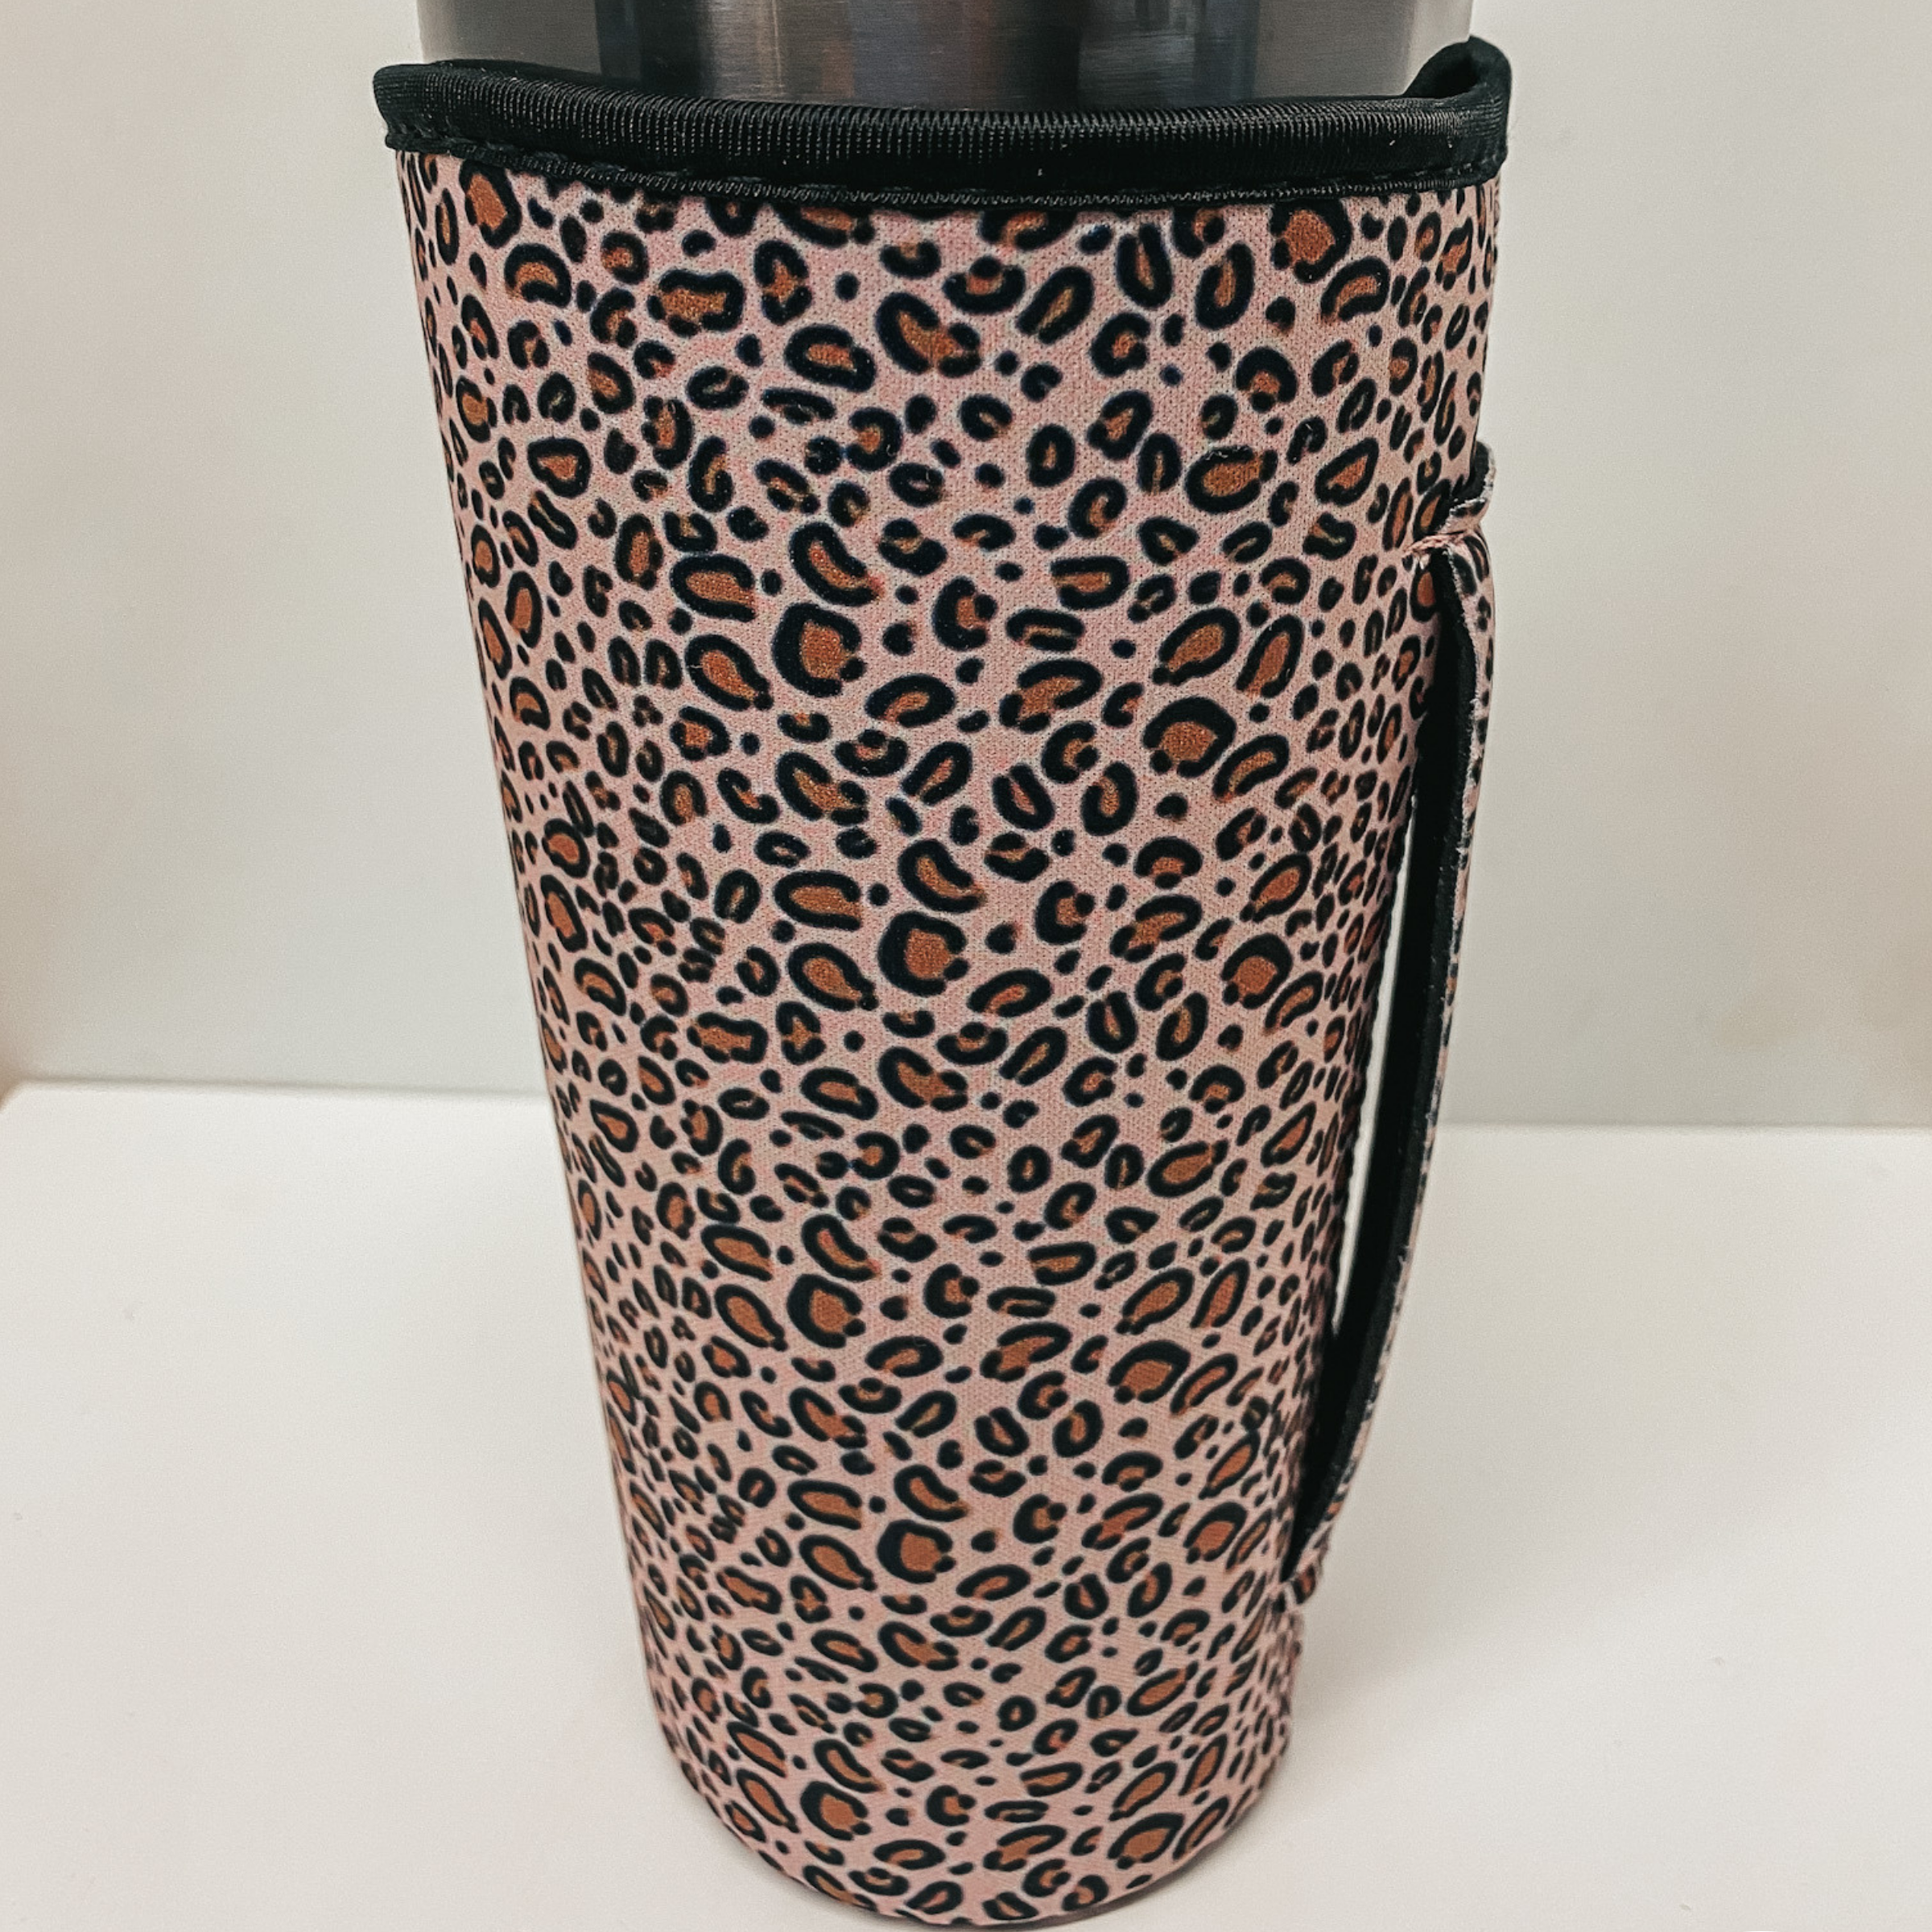 Tumbler Drink Sleeve in Blush Leopard Print - Giddy Up Glamour Boutique